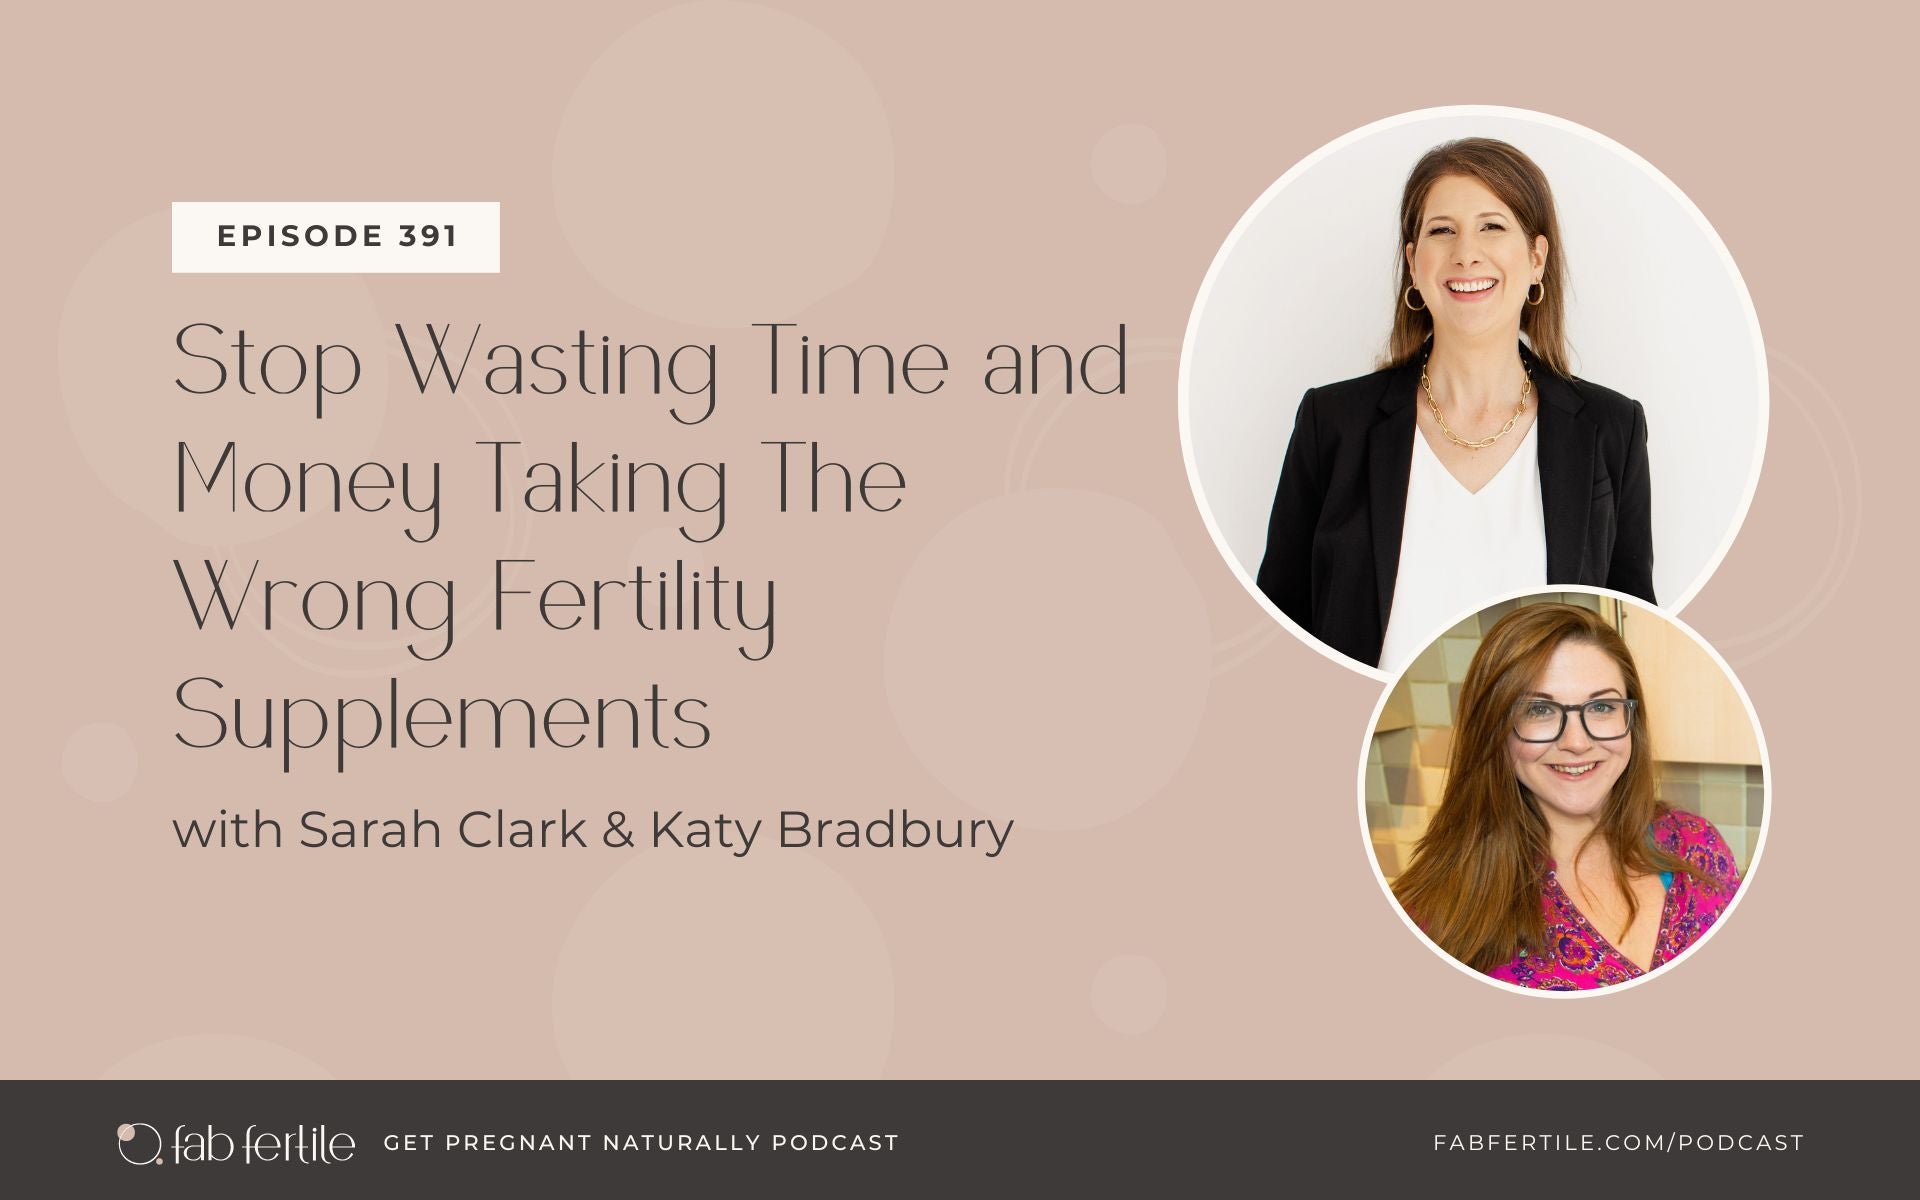 Stop Wasting Time and Money Taking The Wrong Fertility Supplements